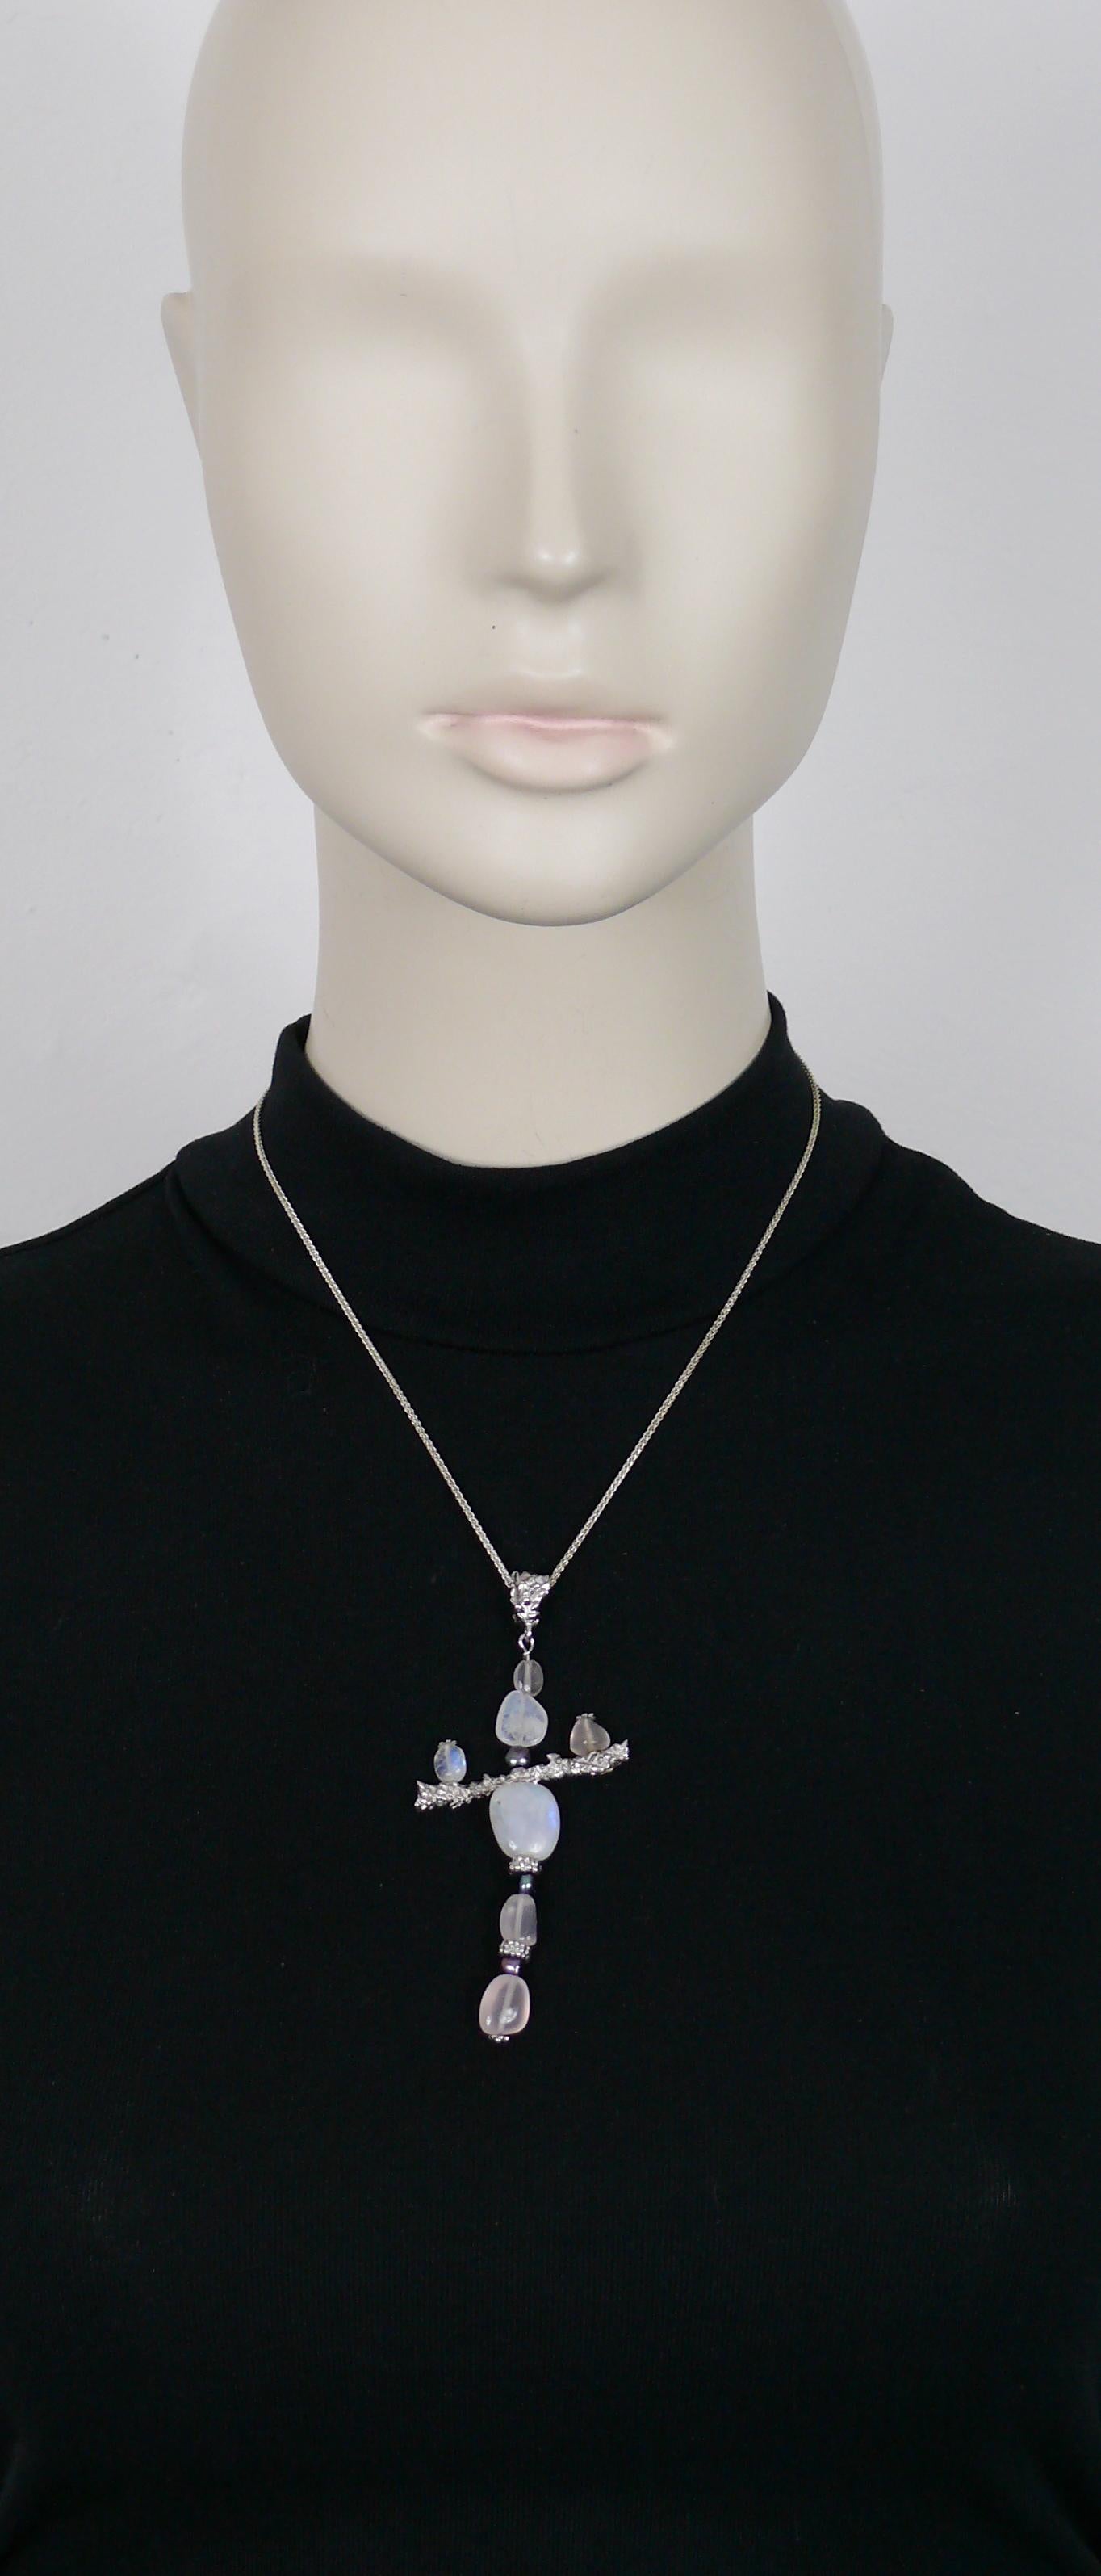 Unsigned CHRISTIAN LACROIX vintage sterling silver cross pendant necklace featuring semi precisous stones.

Sterling silver hallmarks 925 on the chain and bail.
UNSIGNED (but very well known pendant necklace model).

Indicative measurements : chain